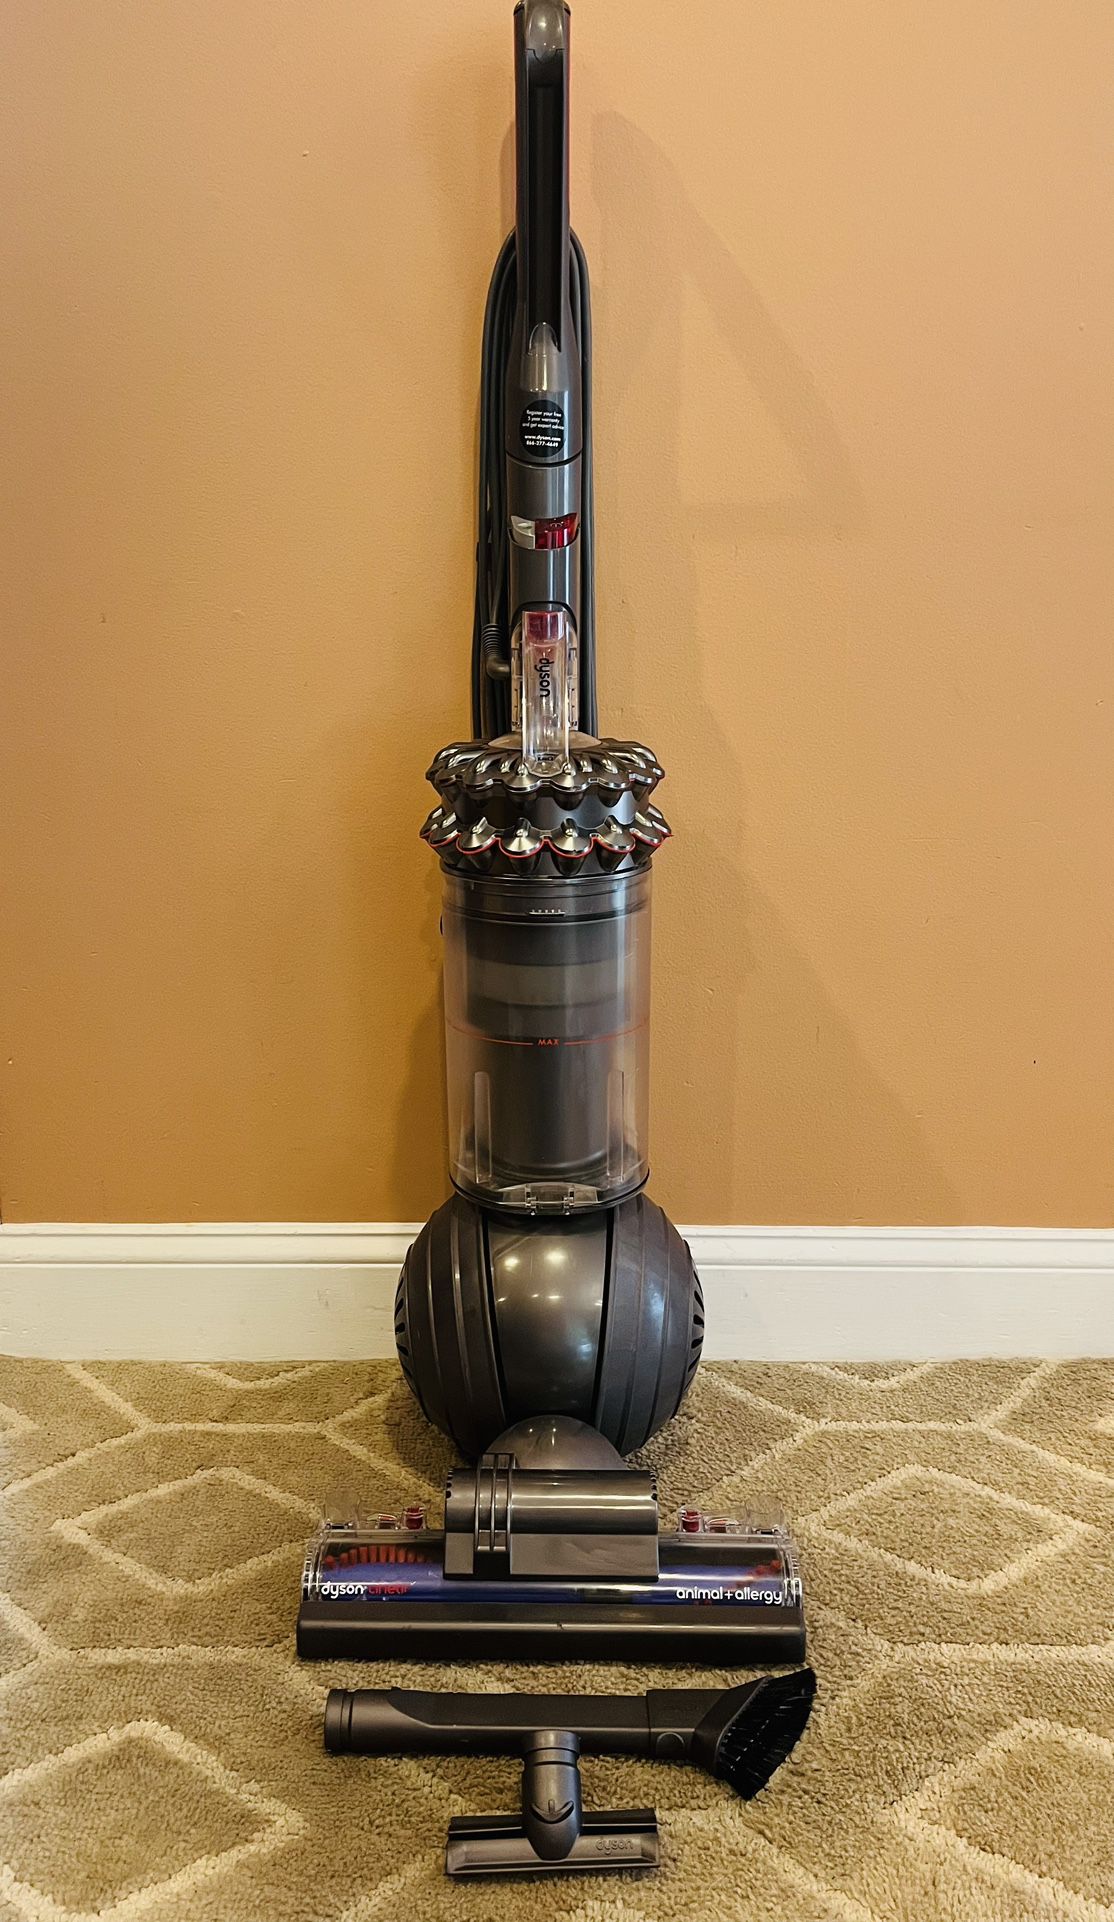 Dyson Cinetic Animal AndAllergy Vacuum Cleaner